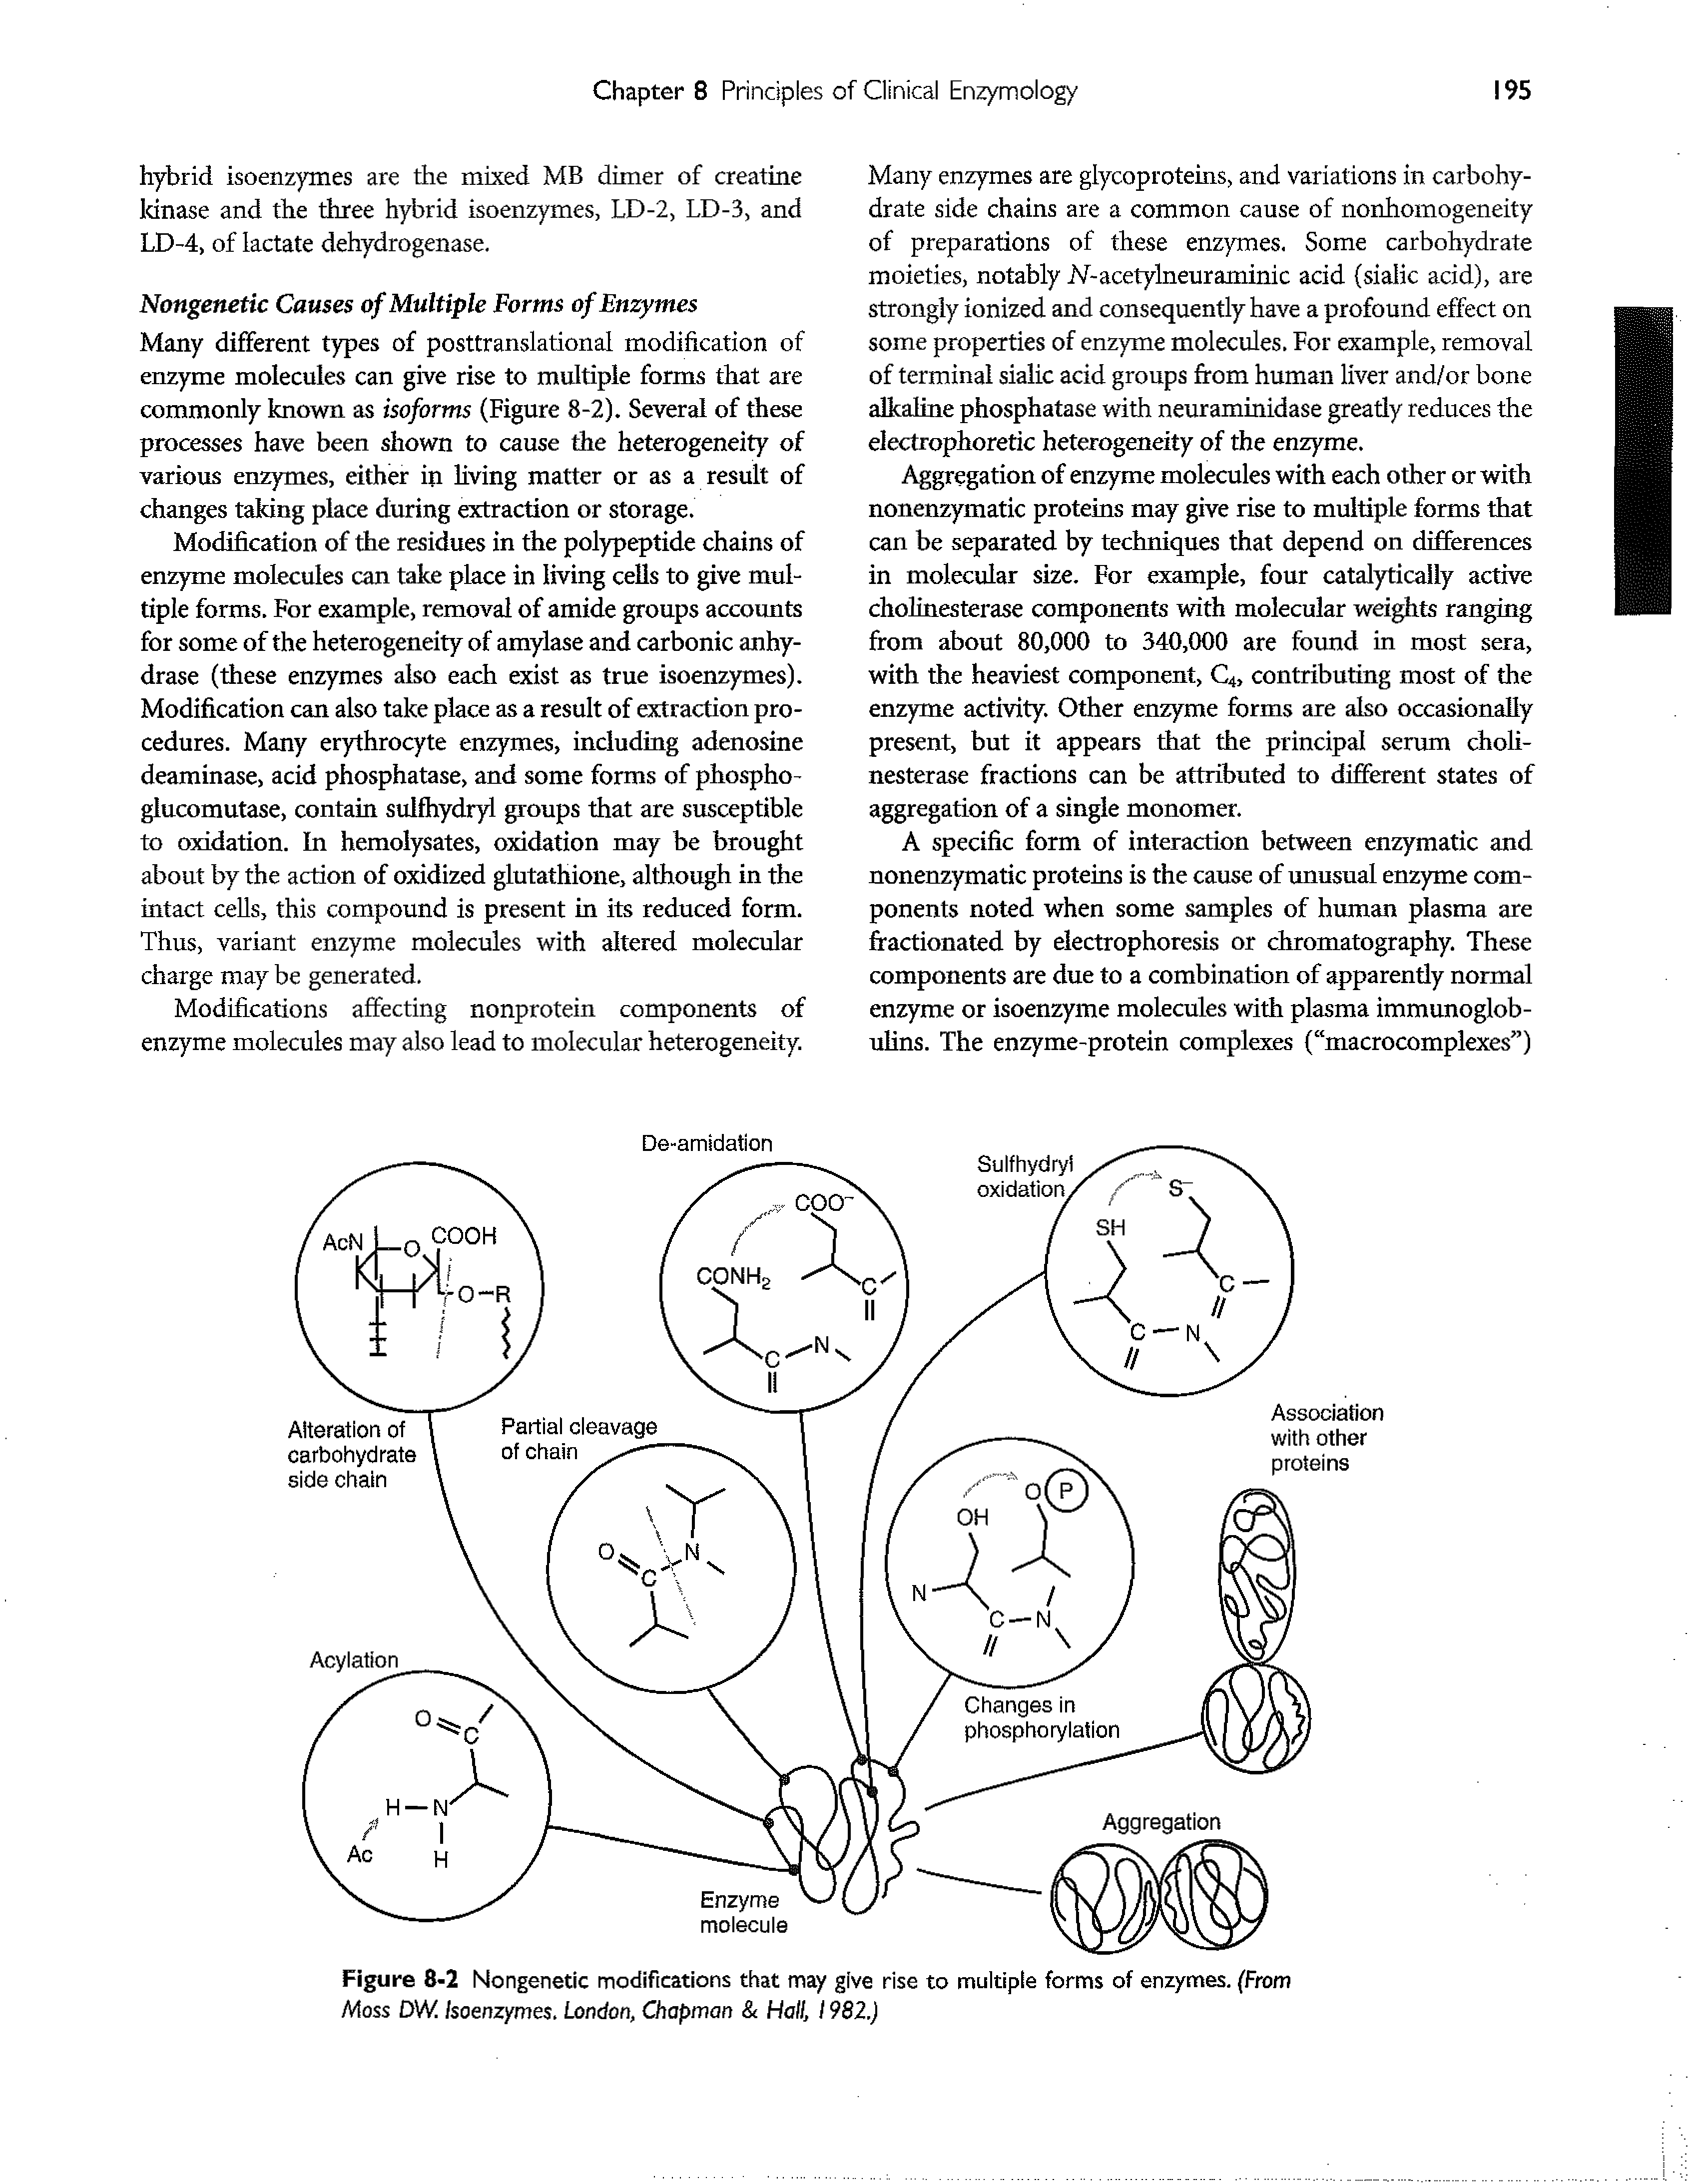 Figure 8-2 Nongenetic modifications that may give rise to multiple forms of enzymes. (From A4oss DW. Isoenzymes. London, Chapman Hall, 1982.)...